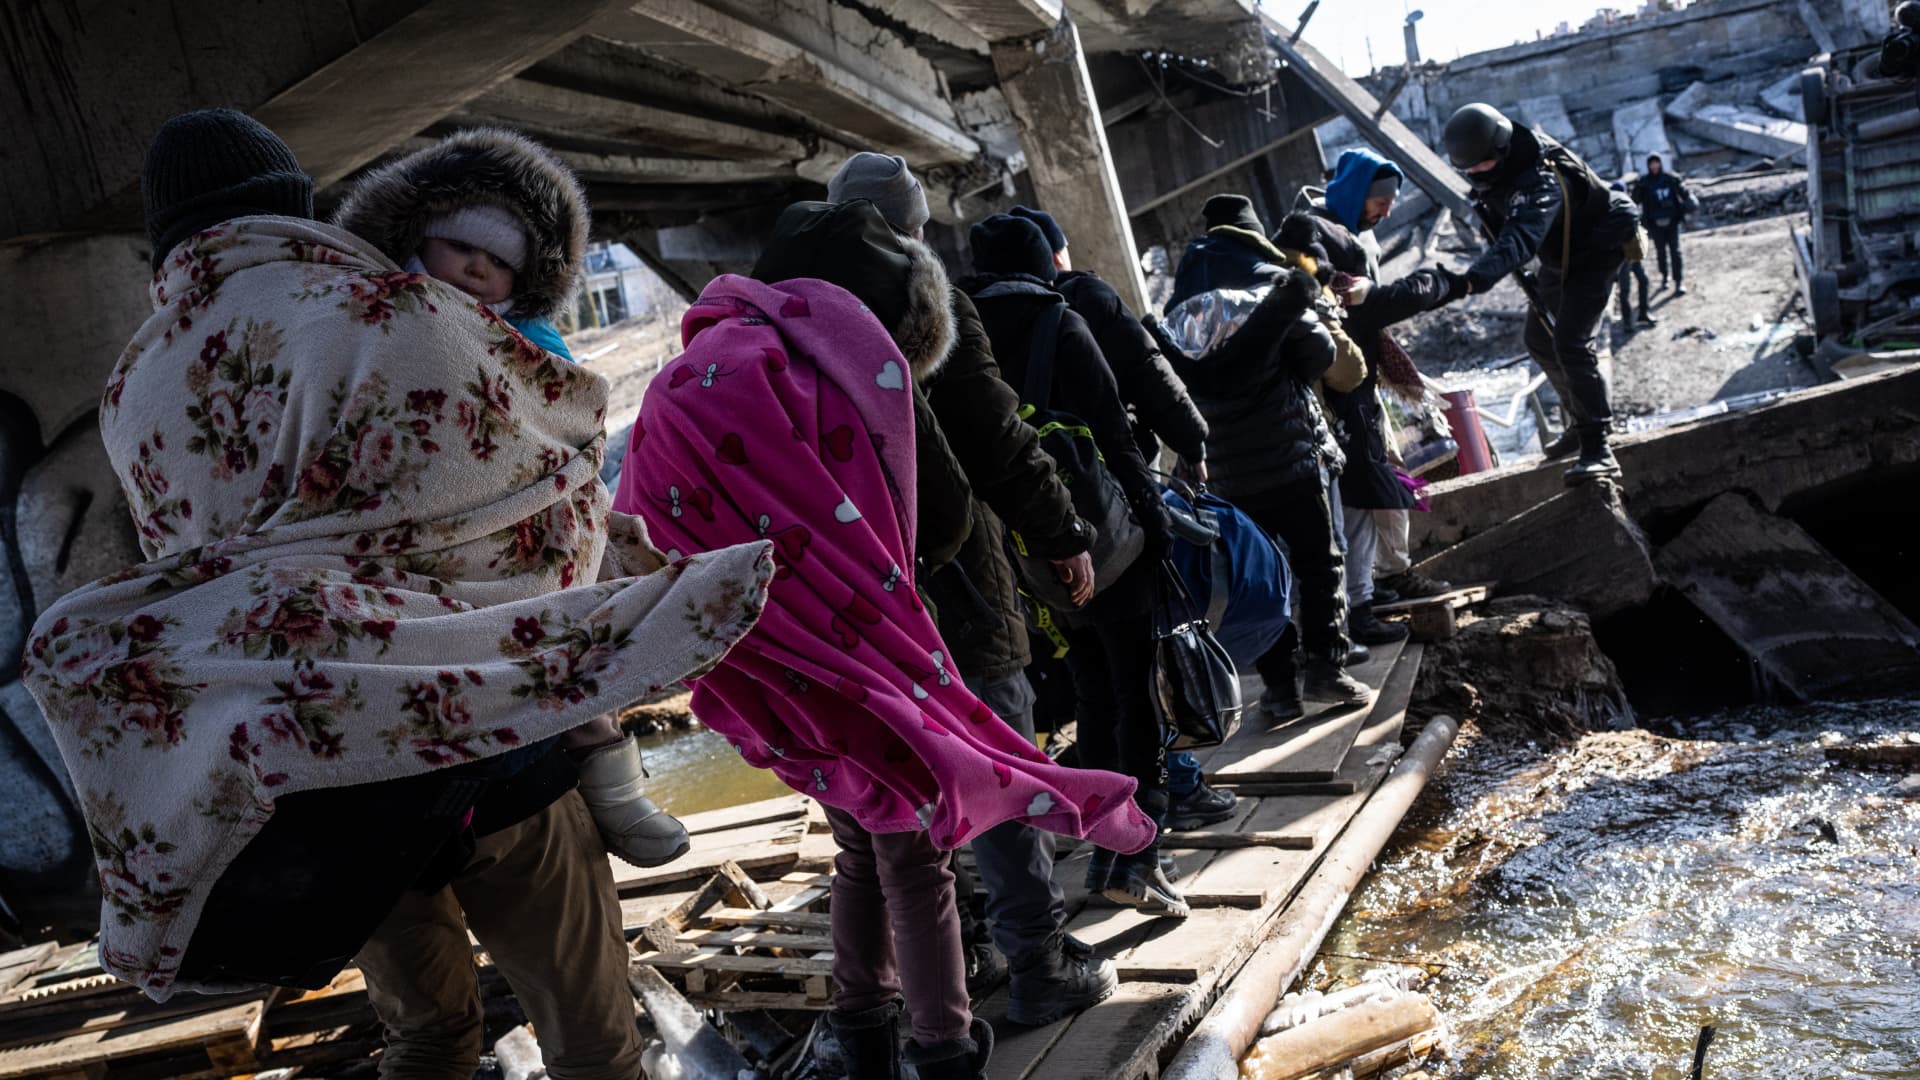 Civilians continue to flee the city of Irpin, Ukraine on March 11, 2022